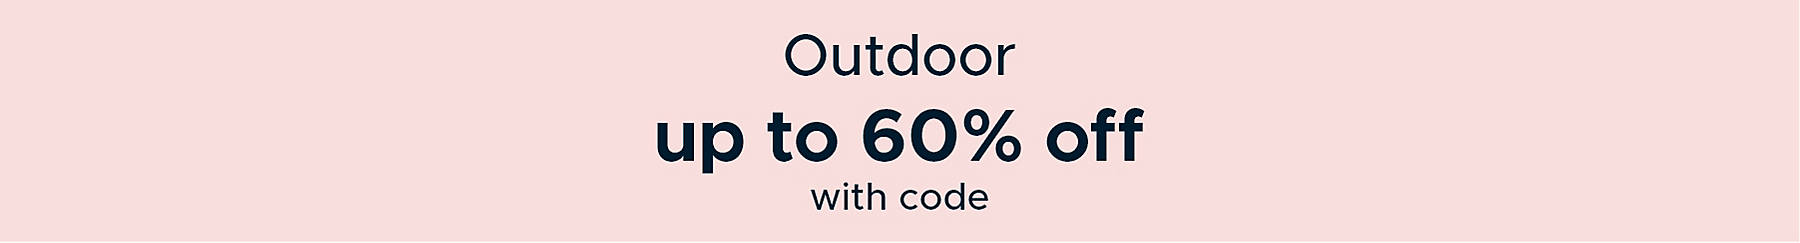 Outdoor up to 60% off with code